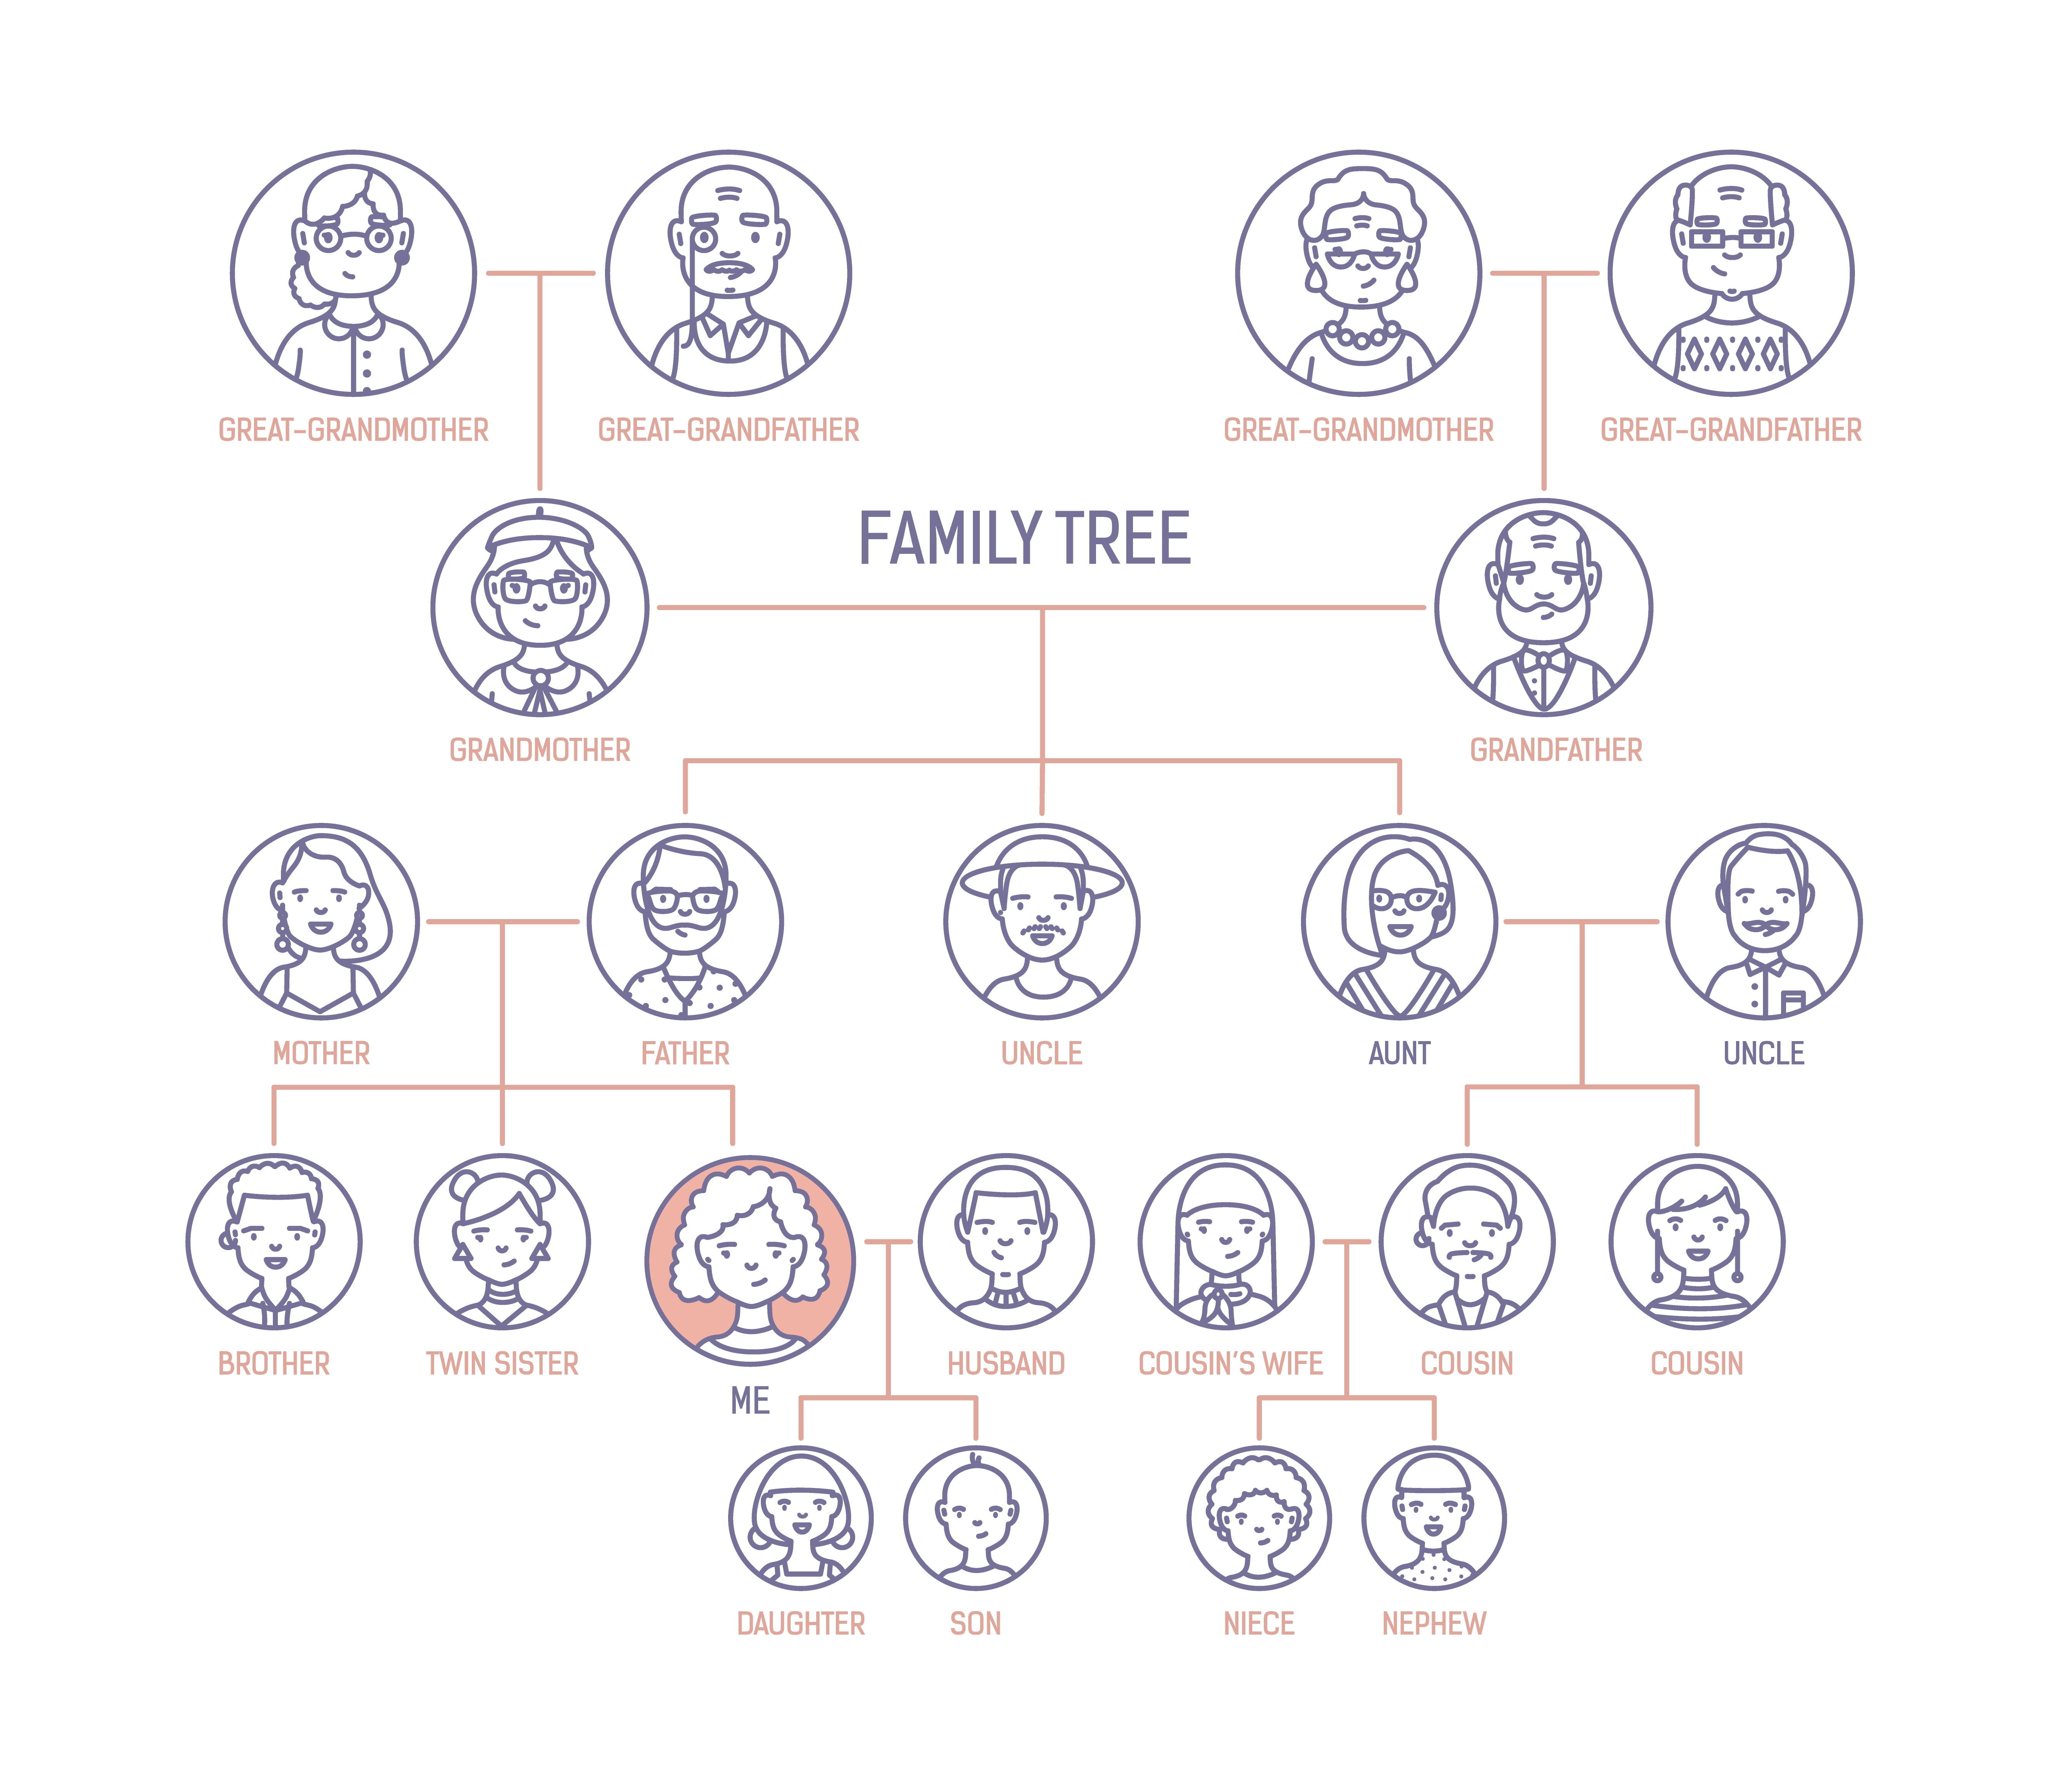 Uncles daughter. Family Tree with great-grandmother. Родословная шаблон на 10 человек. Family Tree niece nephew. Niece and nephew vector image.